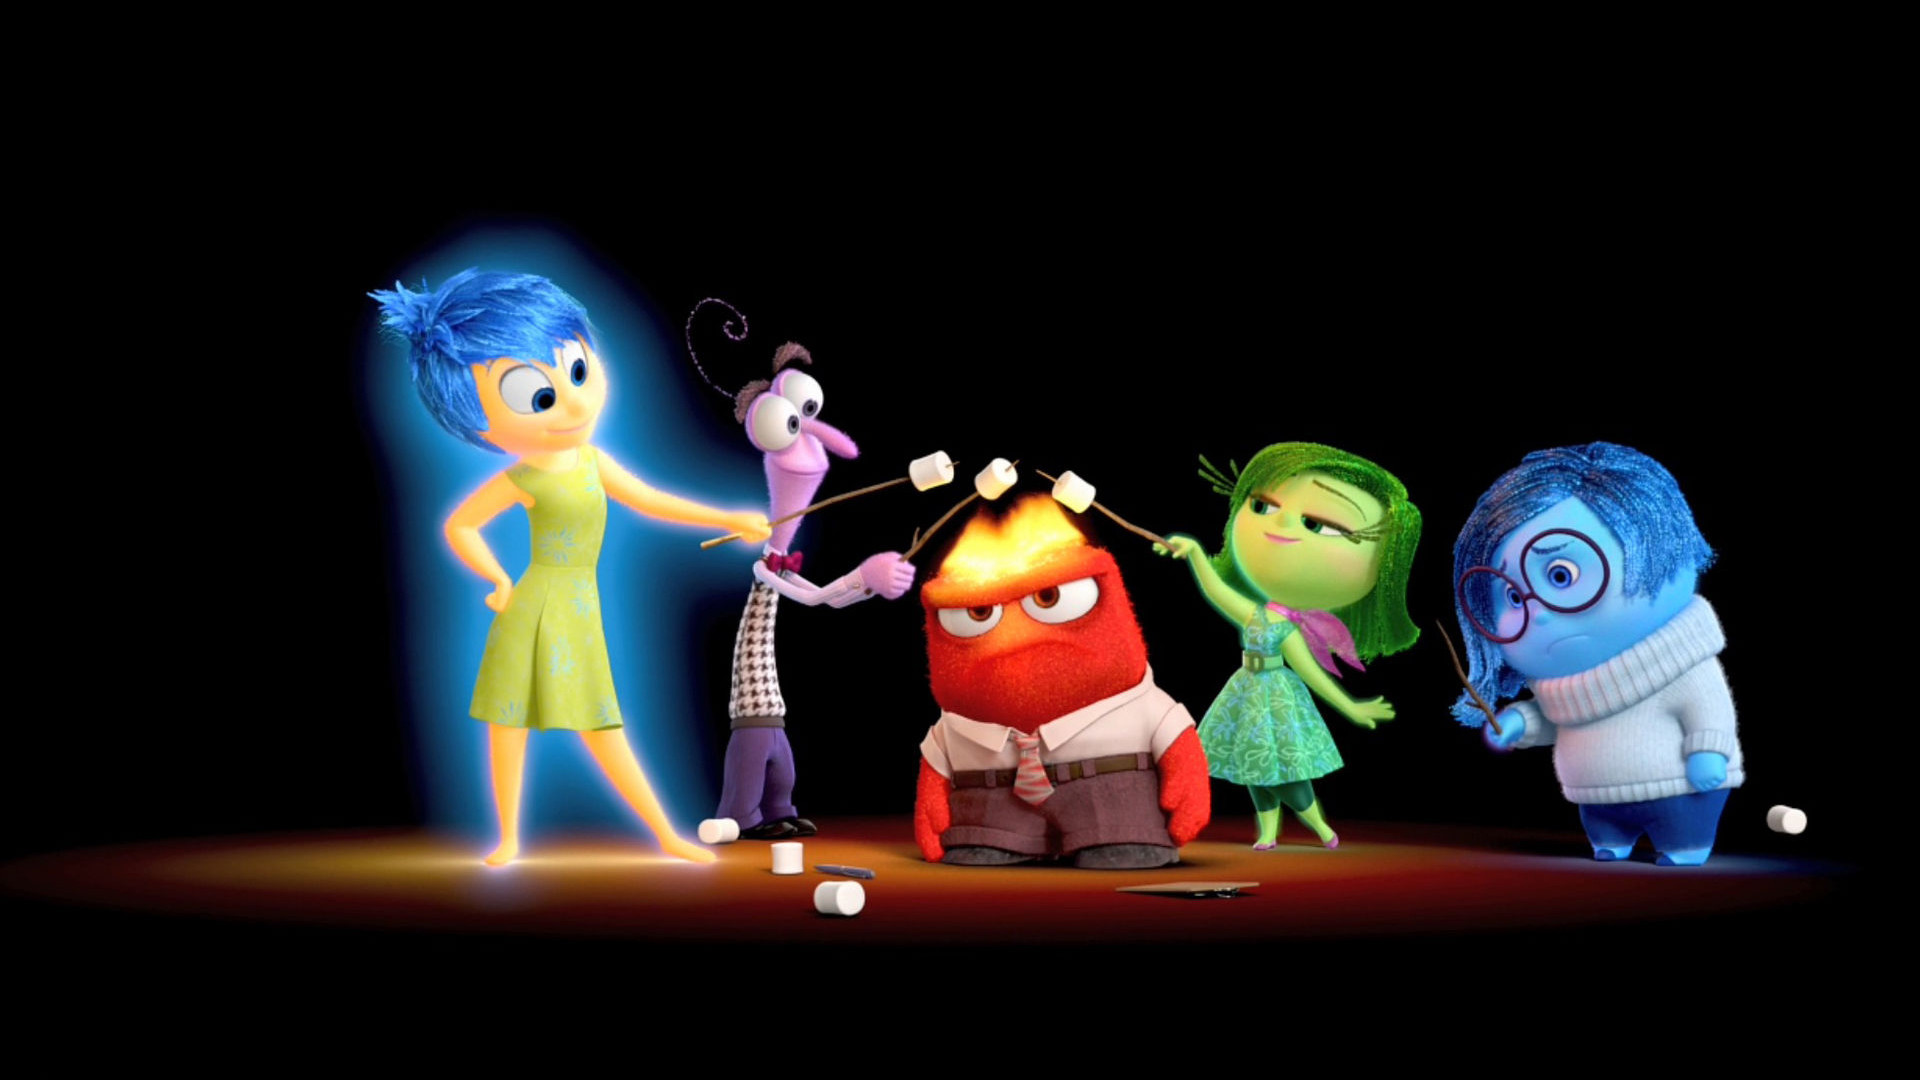 1920x1080 Inside Out Wallpaper (34 Wallpapers)